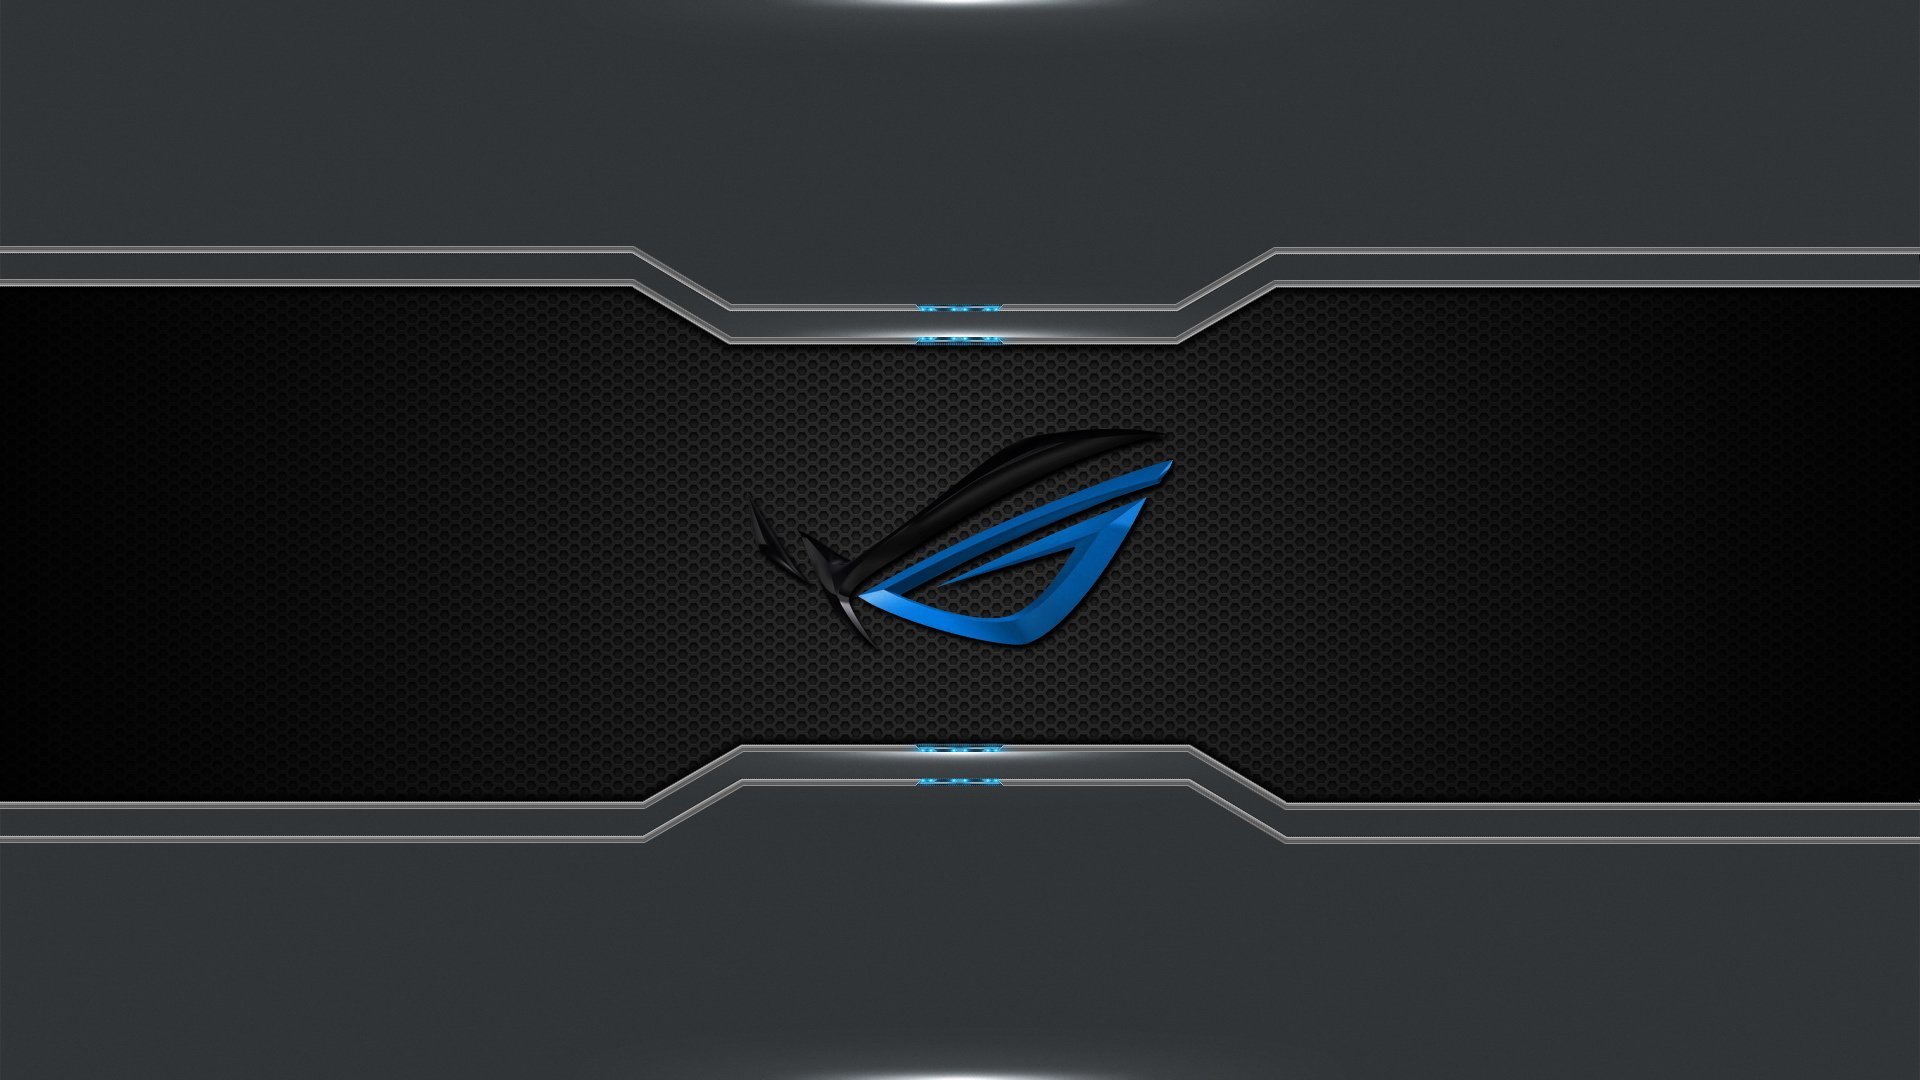 asus wallpaper full hd,technology,electronic device,automotive design,logo,electric blue